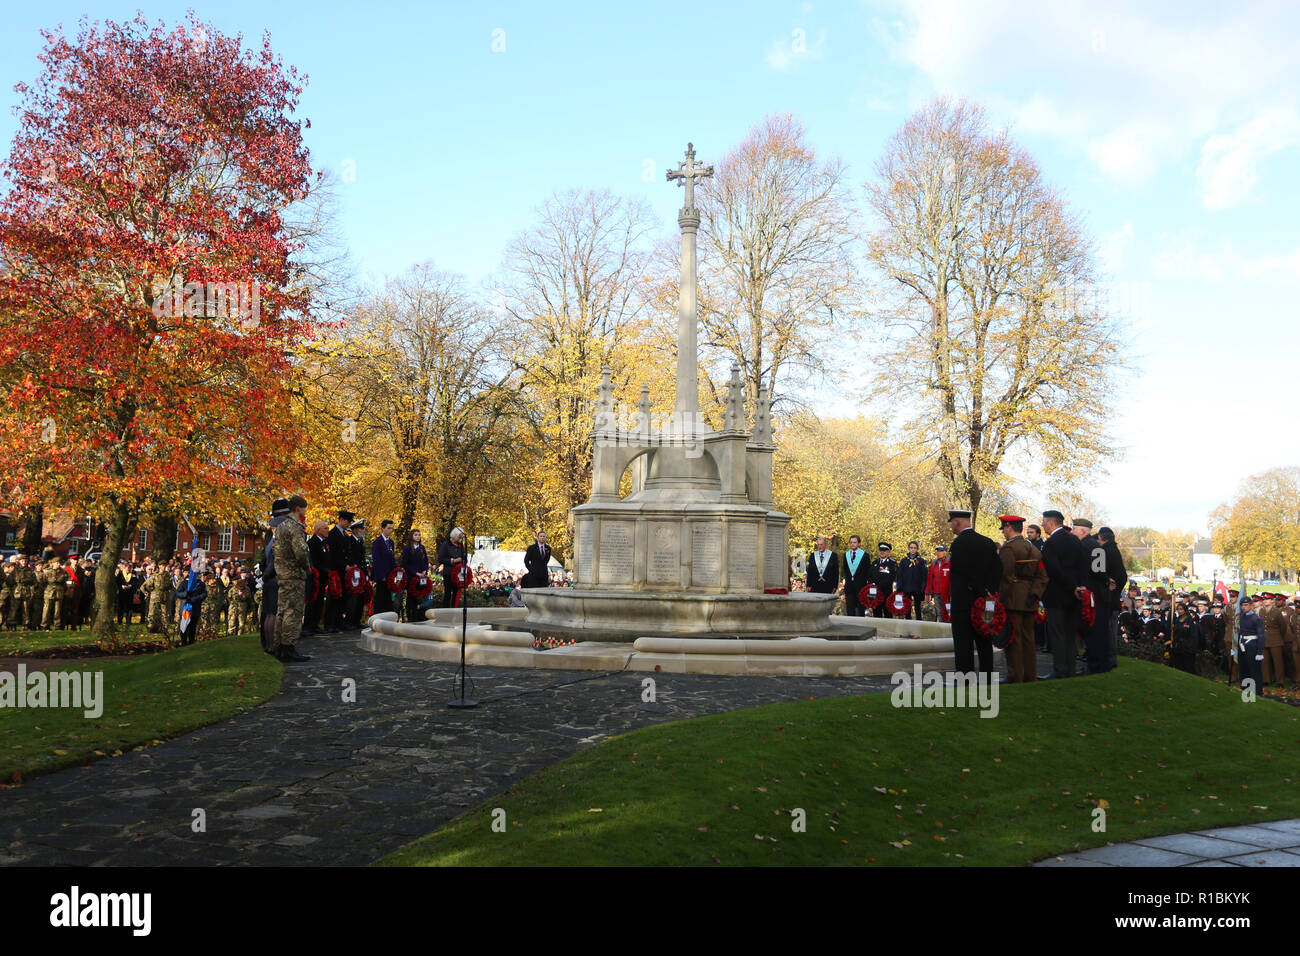 Chichester Remembrance, West Sussex, UK. Gillian Keegan, MP for the Chichester Constituency pictured amongst other VIPs at Litten Gardens, St Pancras Road, Chichester for the Service of Remembrance. 11th November 2018. The City Council has commissioned a special sculpture that will be located in a newly designed Garden of Reflection and Reconciliation located on the North side of Litten Gardens. In the adjacent New Park Road, the Garrison Artillery Volunteers will be manning a World War One 18 pdr gun in New Park Road and firing a barrage of ten rounds in the moments immediately preceding the  Stock Photo